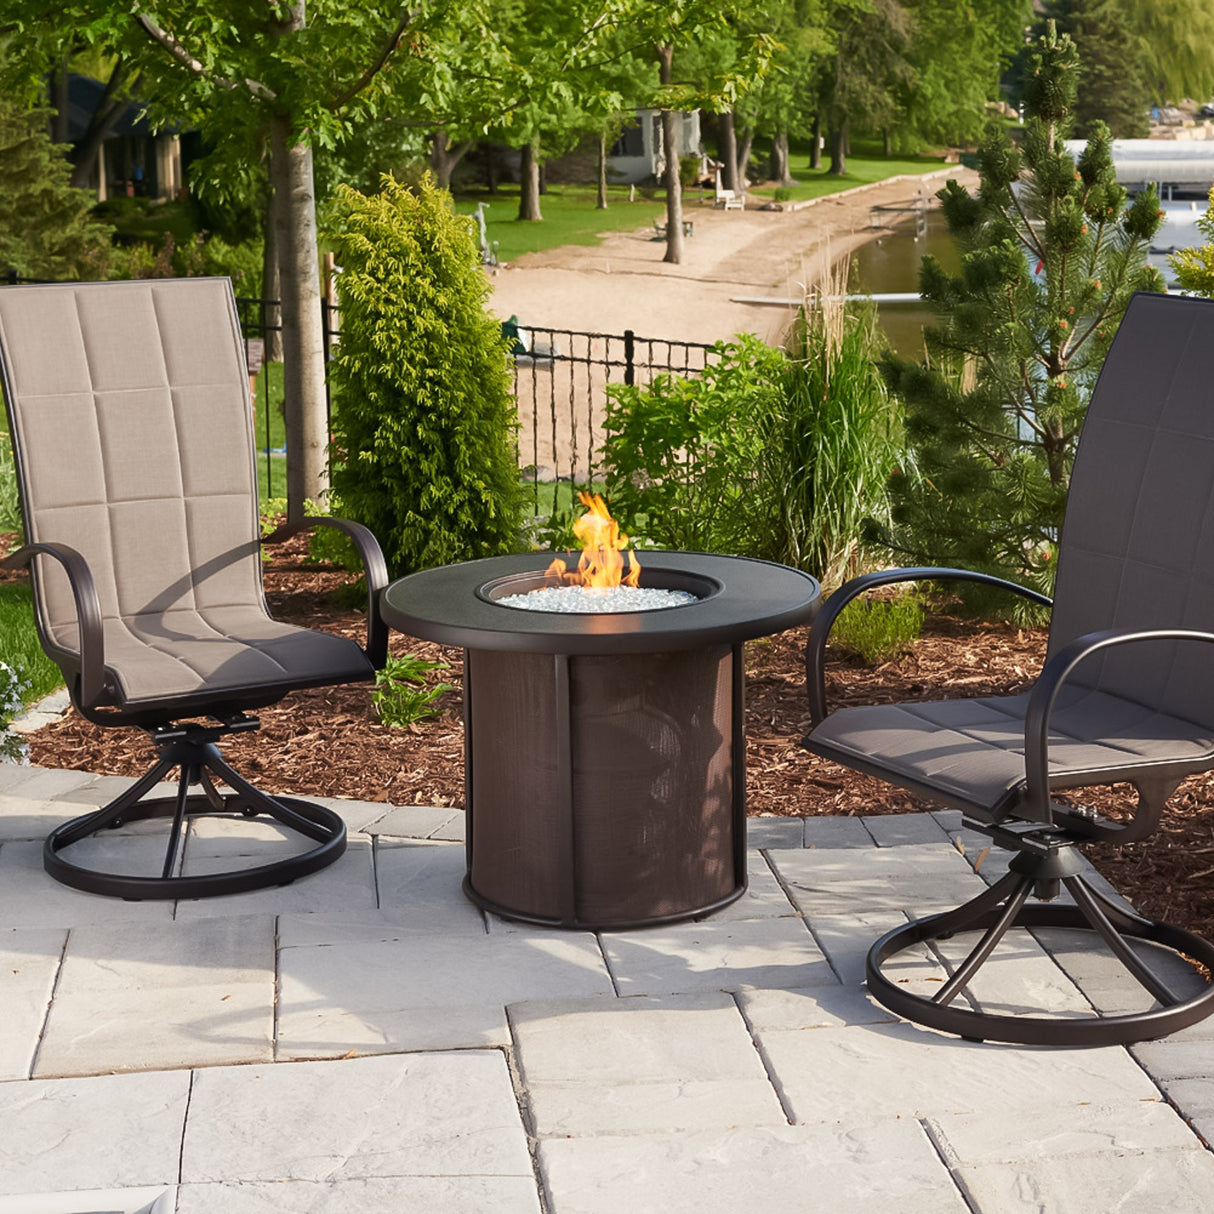 The Brown Stonefire Round Gas Fire Pit Table next to a beach surrounded by patio furniture